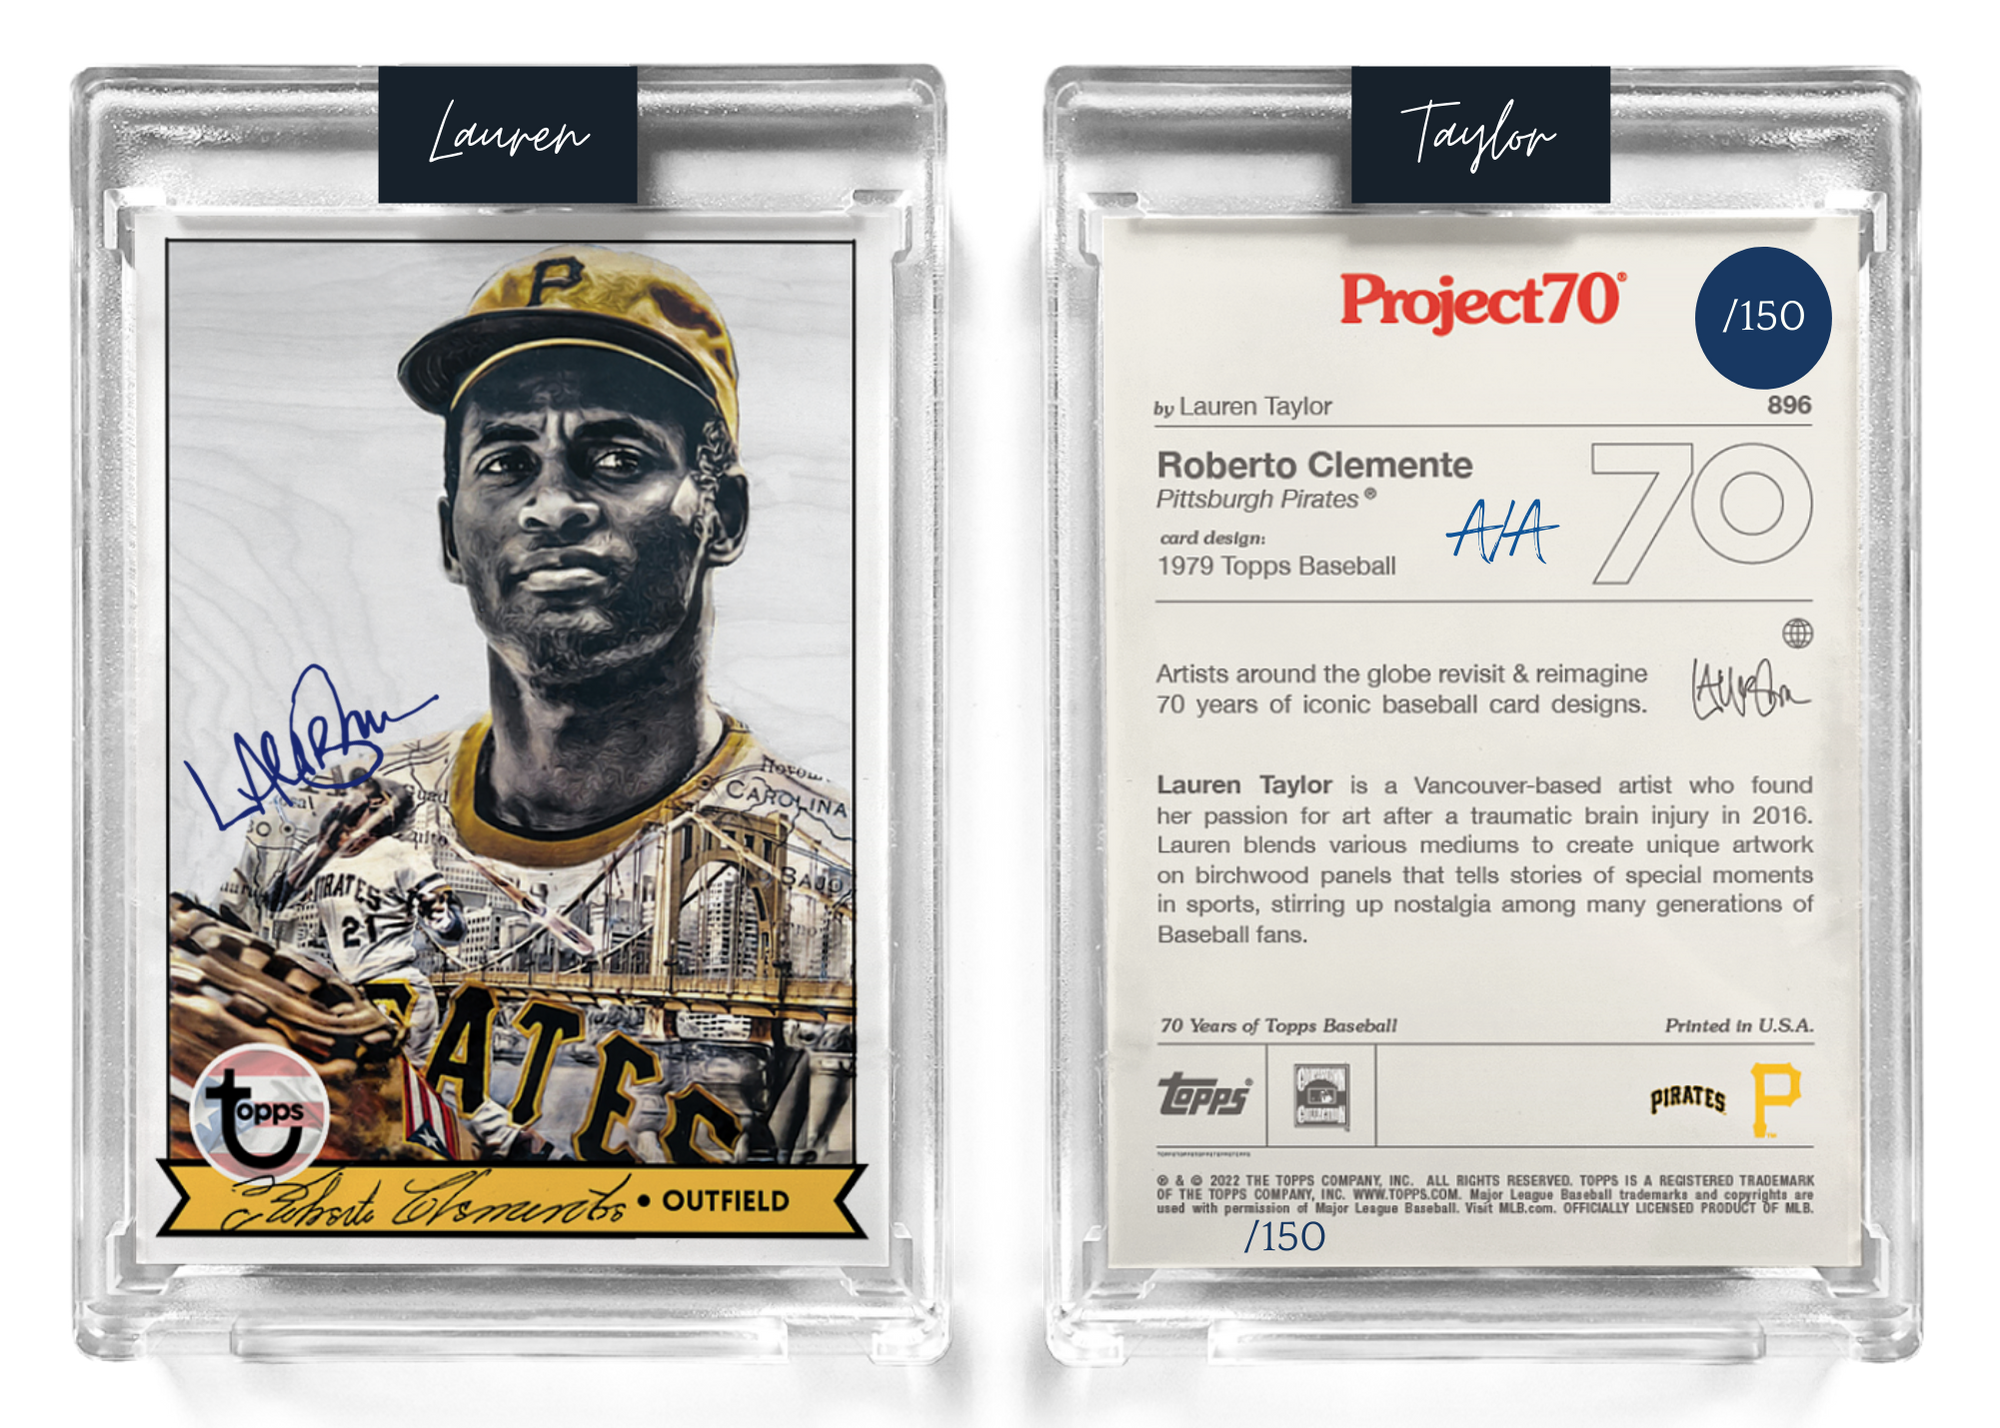 /150 Navy Artist Signature - Topps Project 70 130pt card #896 by Lauren Taylor - Roberto Clemente